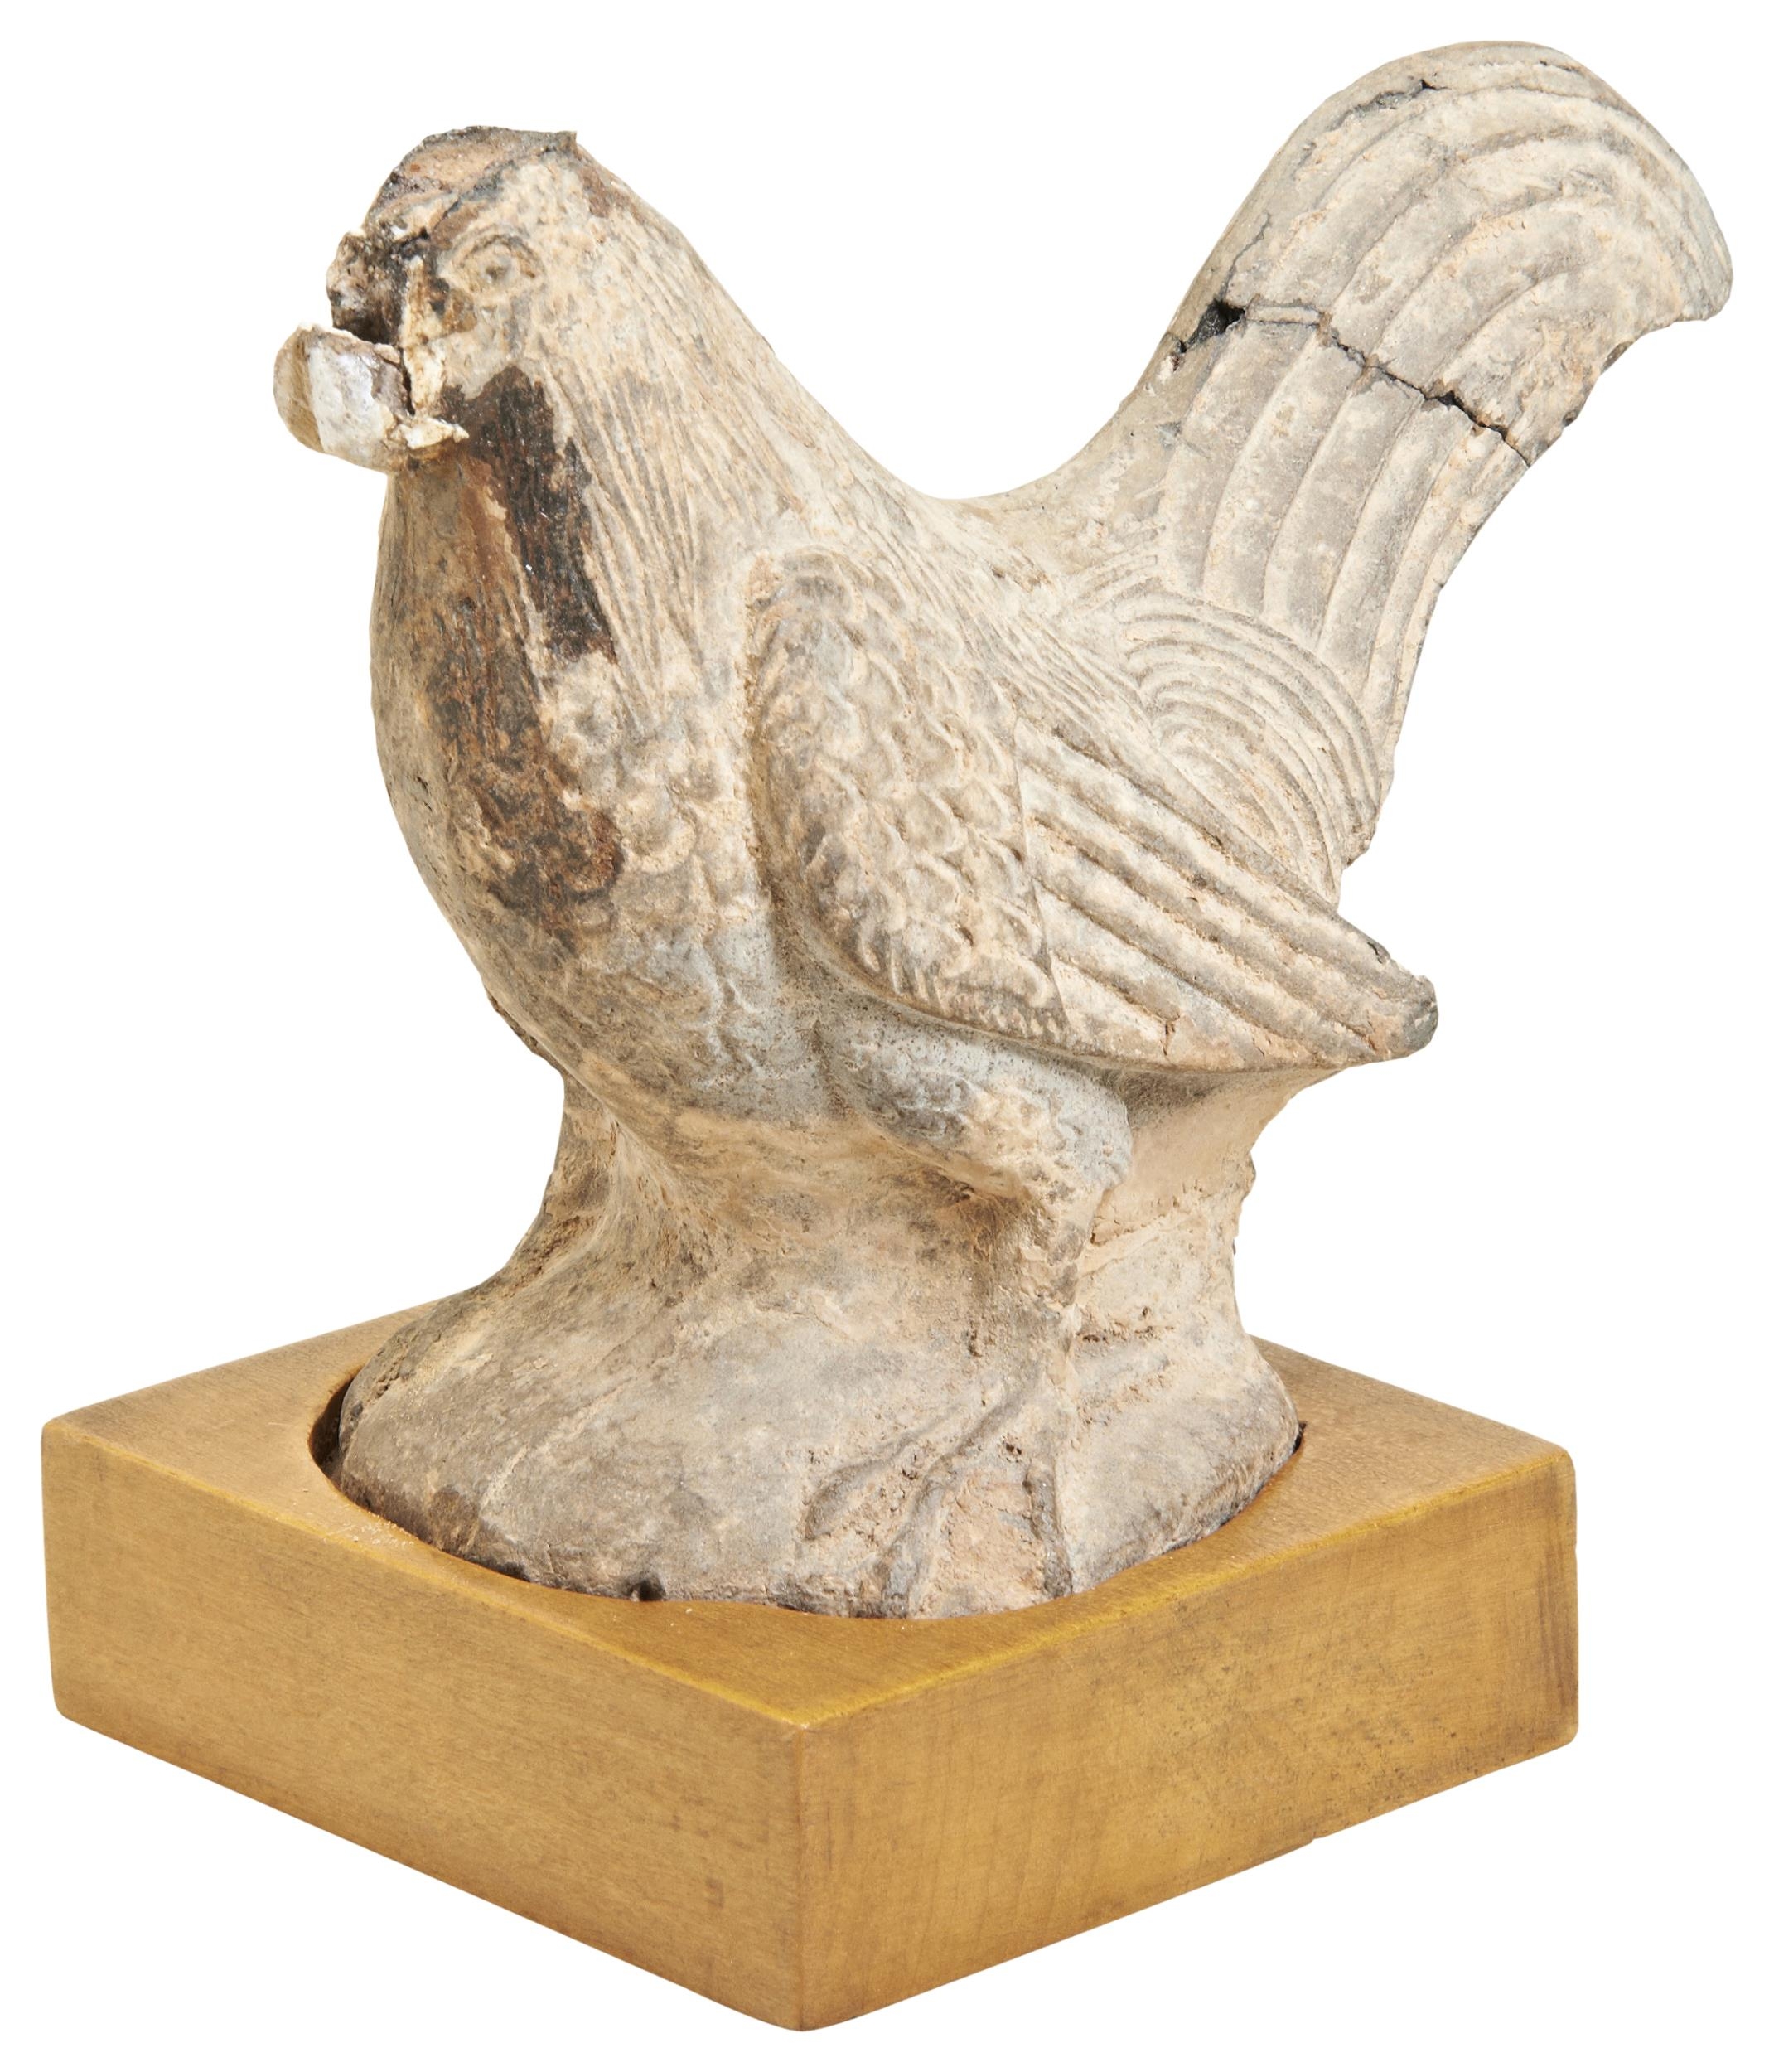 A POTTERY FIGURE OF A COCKEREL EASTERN HAN DYNASTY (AD. 25-227) on a wooden stand, within a fitted